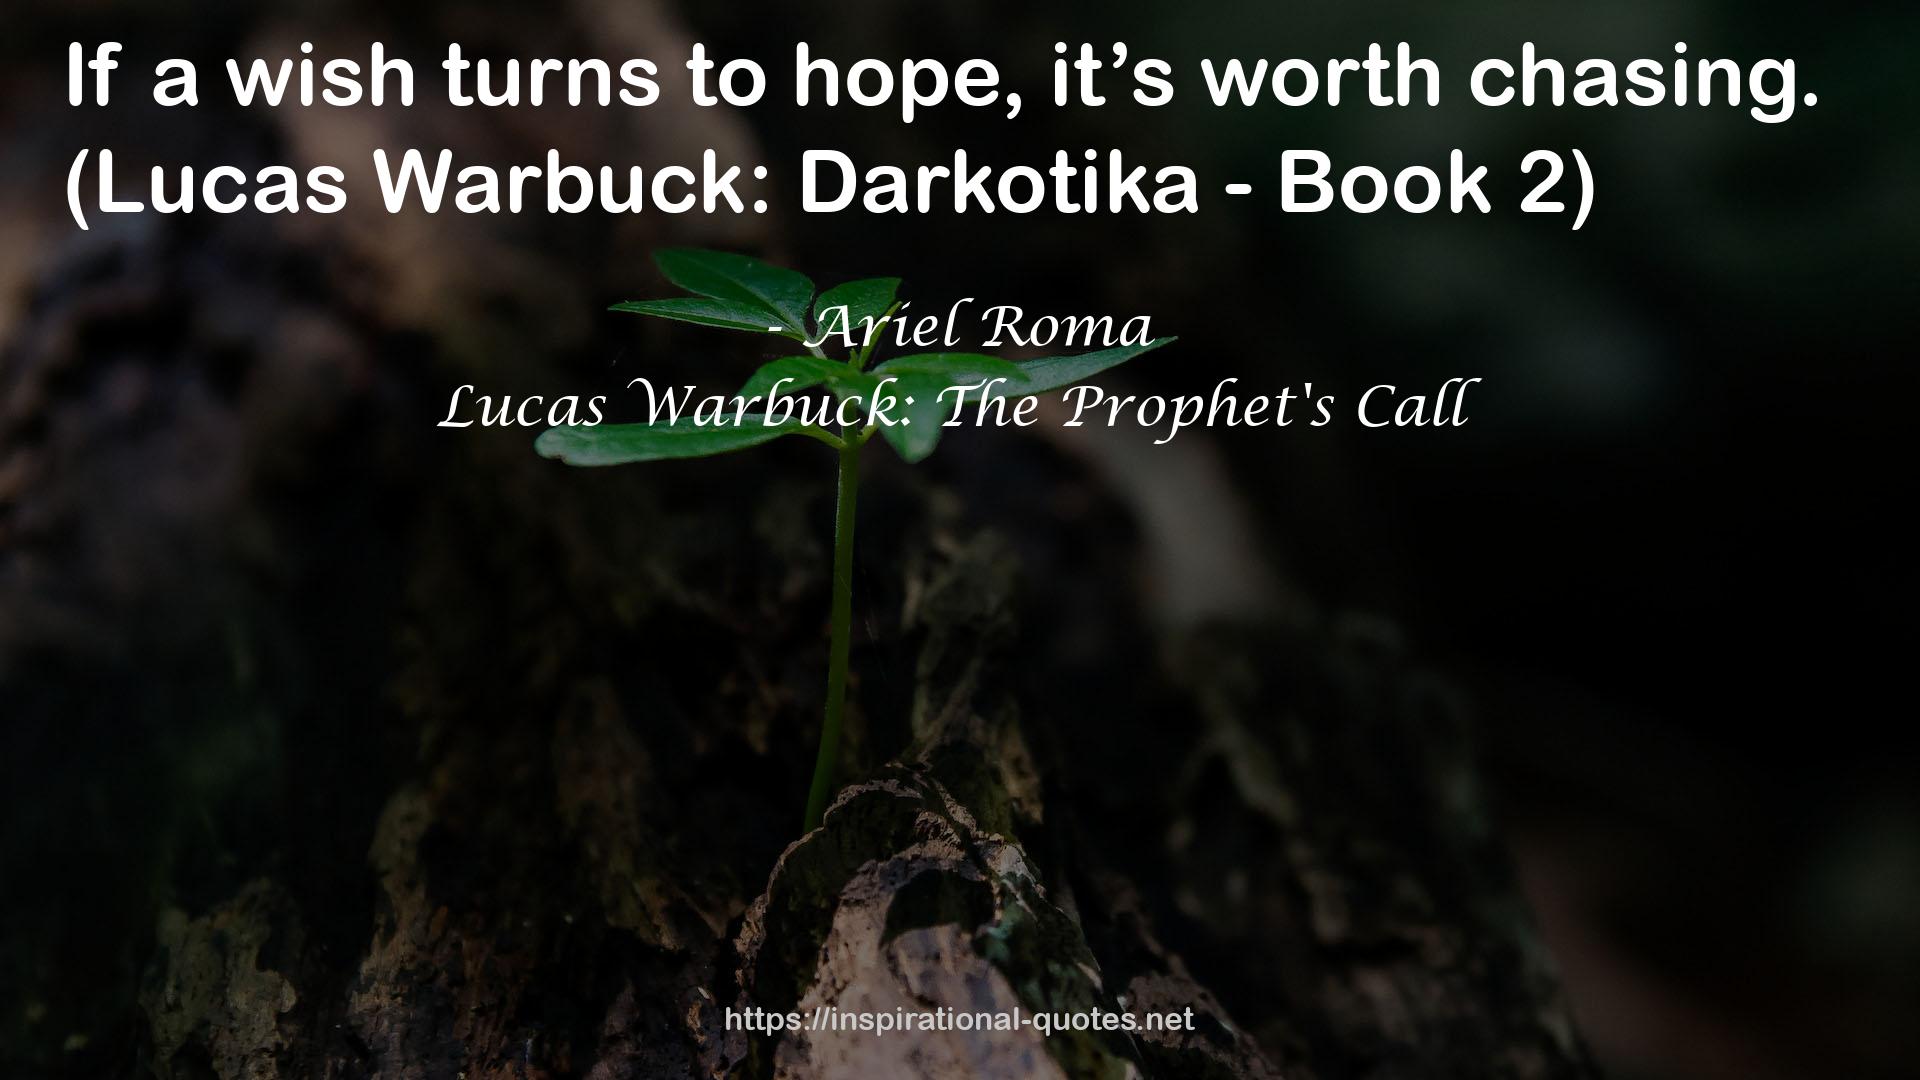 Lucas Warbuck: The Prophet's Call QUOTES